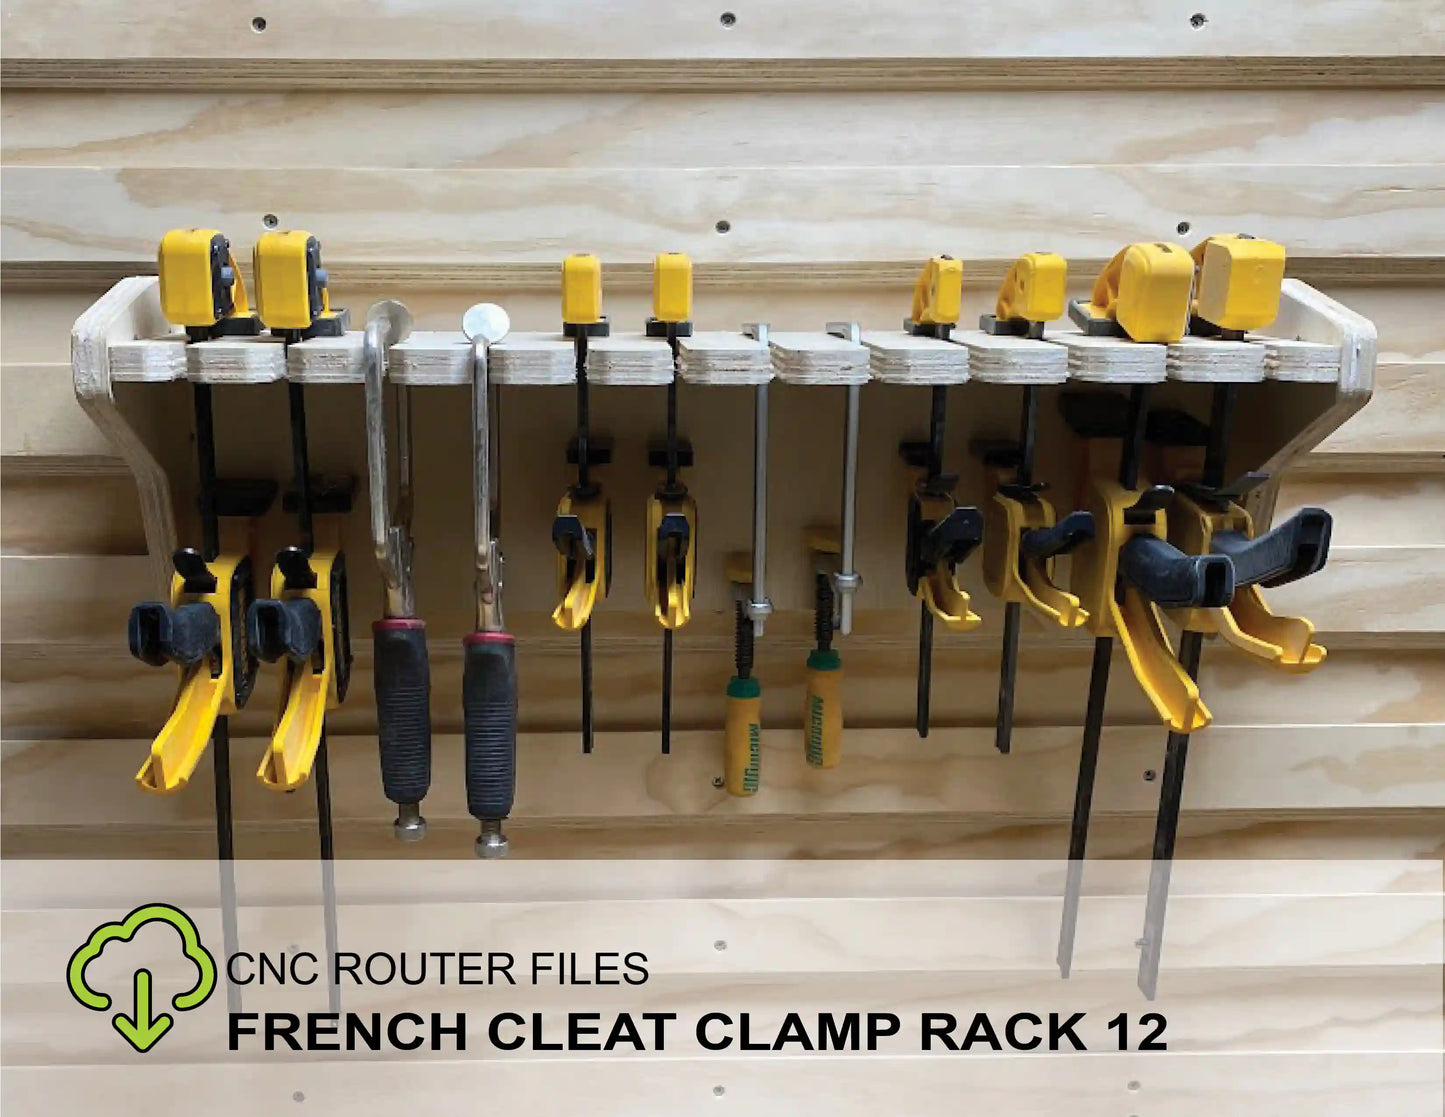 CNC Router Files French Cleat Trigger Clamp Storage Rack